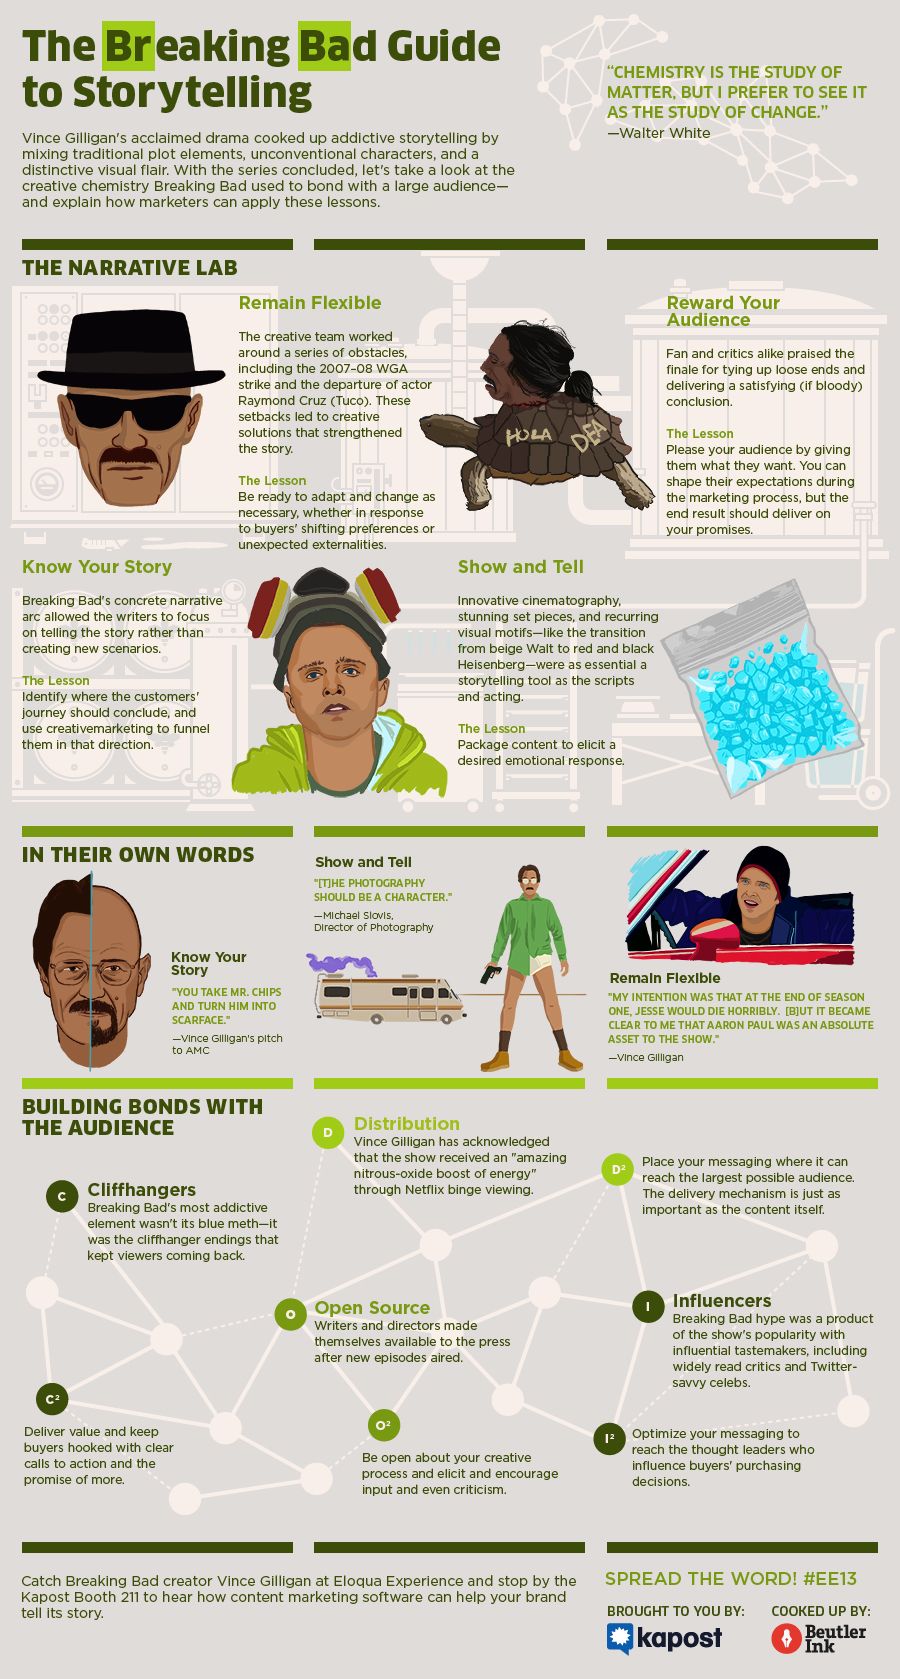 The Breaking Bad Guide to Storytelling